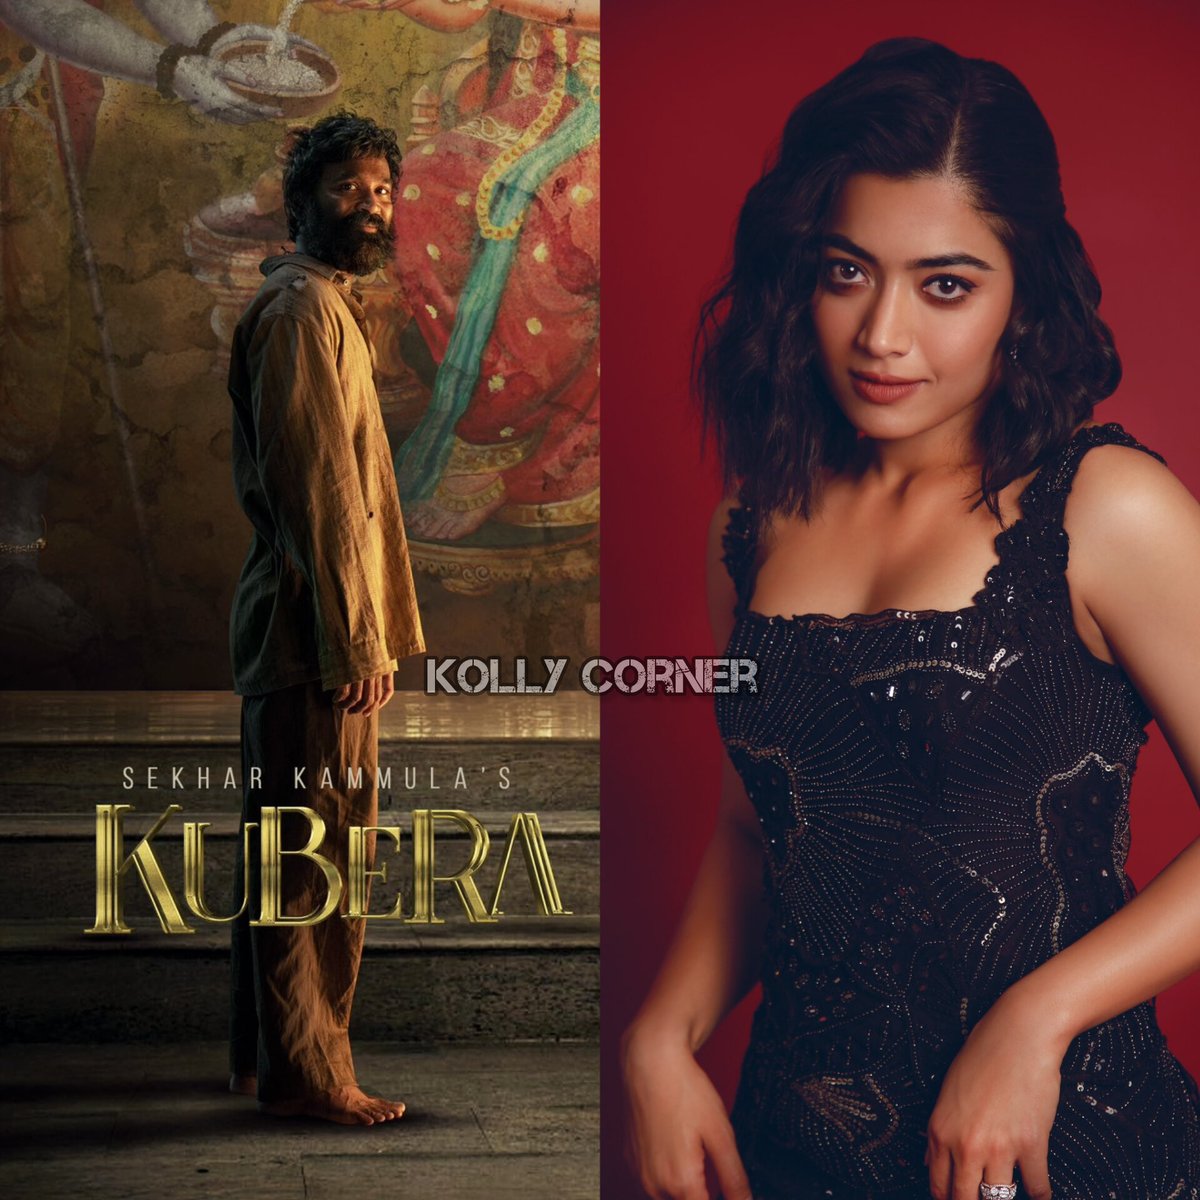 #KUBERA NEXT SCHEDULE 🌟

- Next schedule started today in Mumbai involving #RashmikaMandanna and #Dhanush 🥰

- Schedule planned for 10 days 😍

- #JimSarbh playing a pivotal role in this film 😯